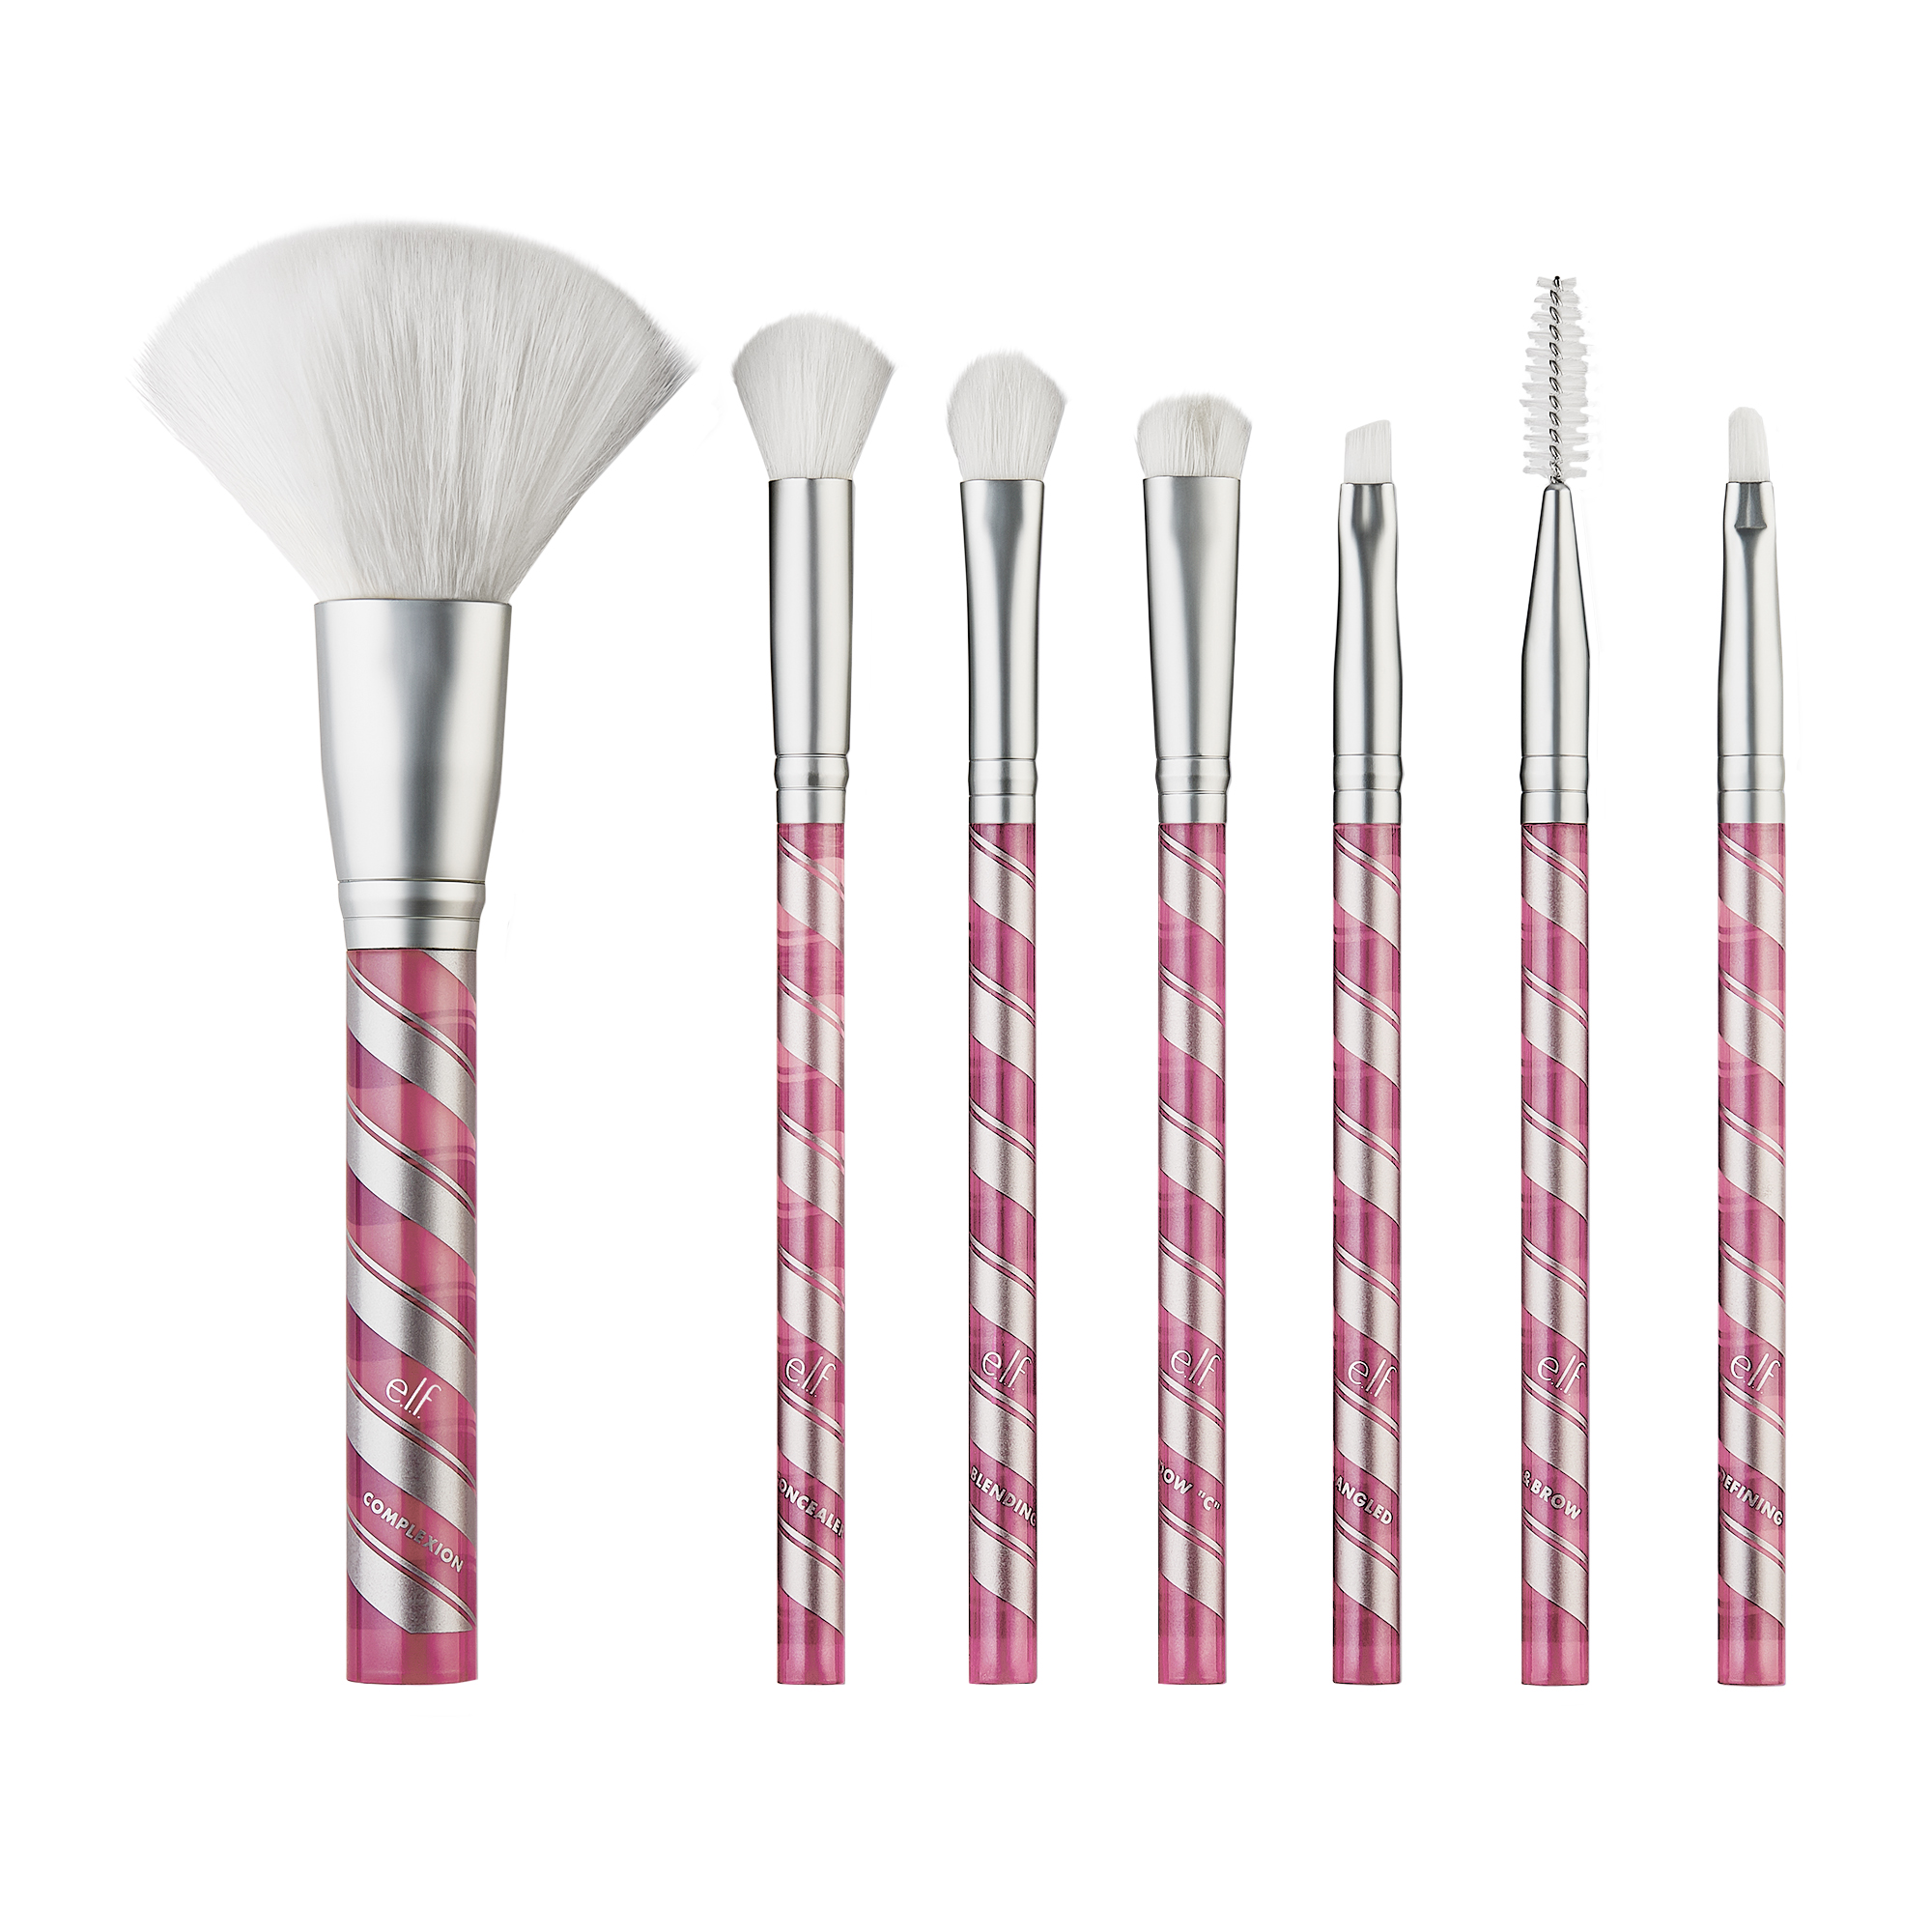 ($23 Value) e.l.f. Candy Cane 7 Piece Holiday Makeup Brush Set, Face & Eye - image 2 of 9